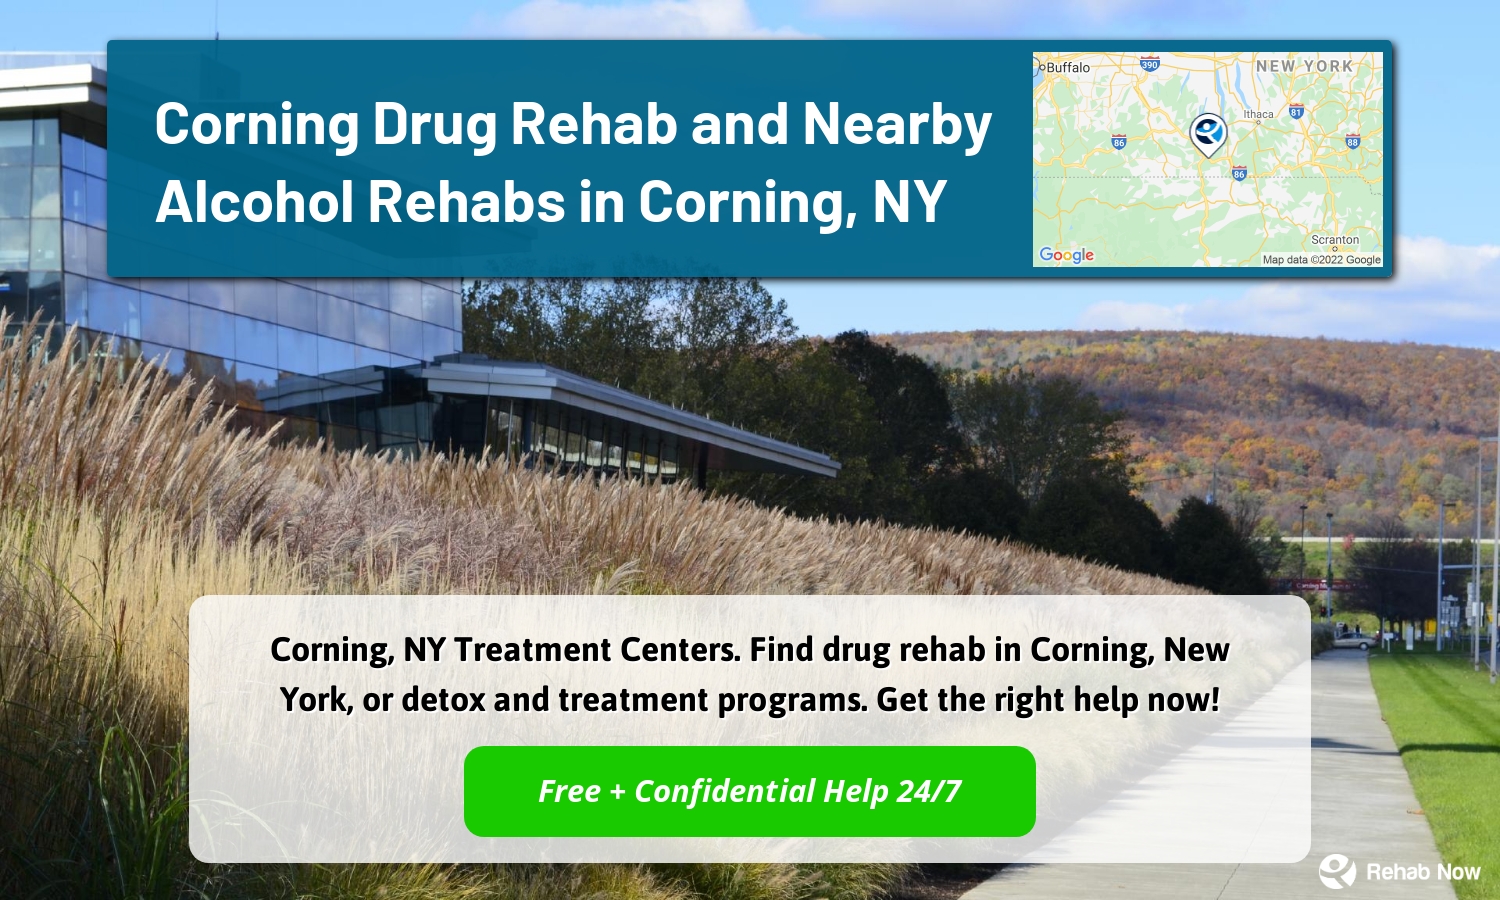 Corning, NY Treatment Centers. Find drug rehab in Corning, New York, or detox and treatment programs. Get the right help now!